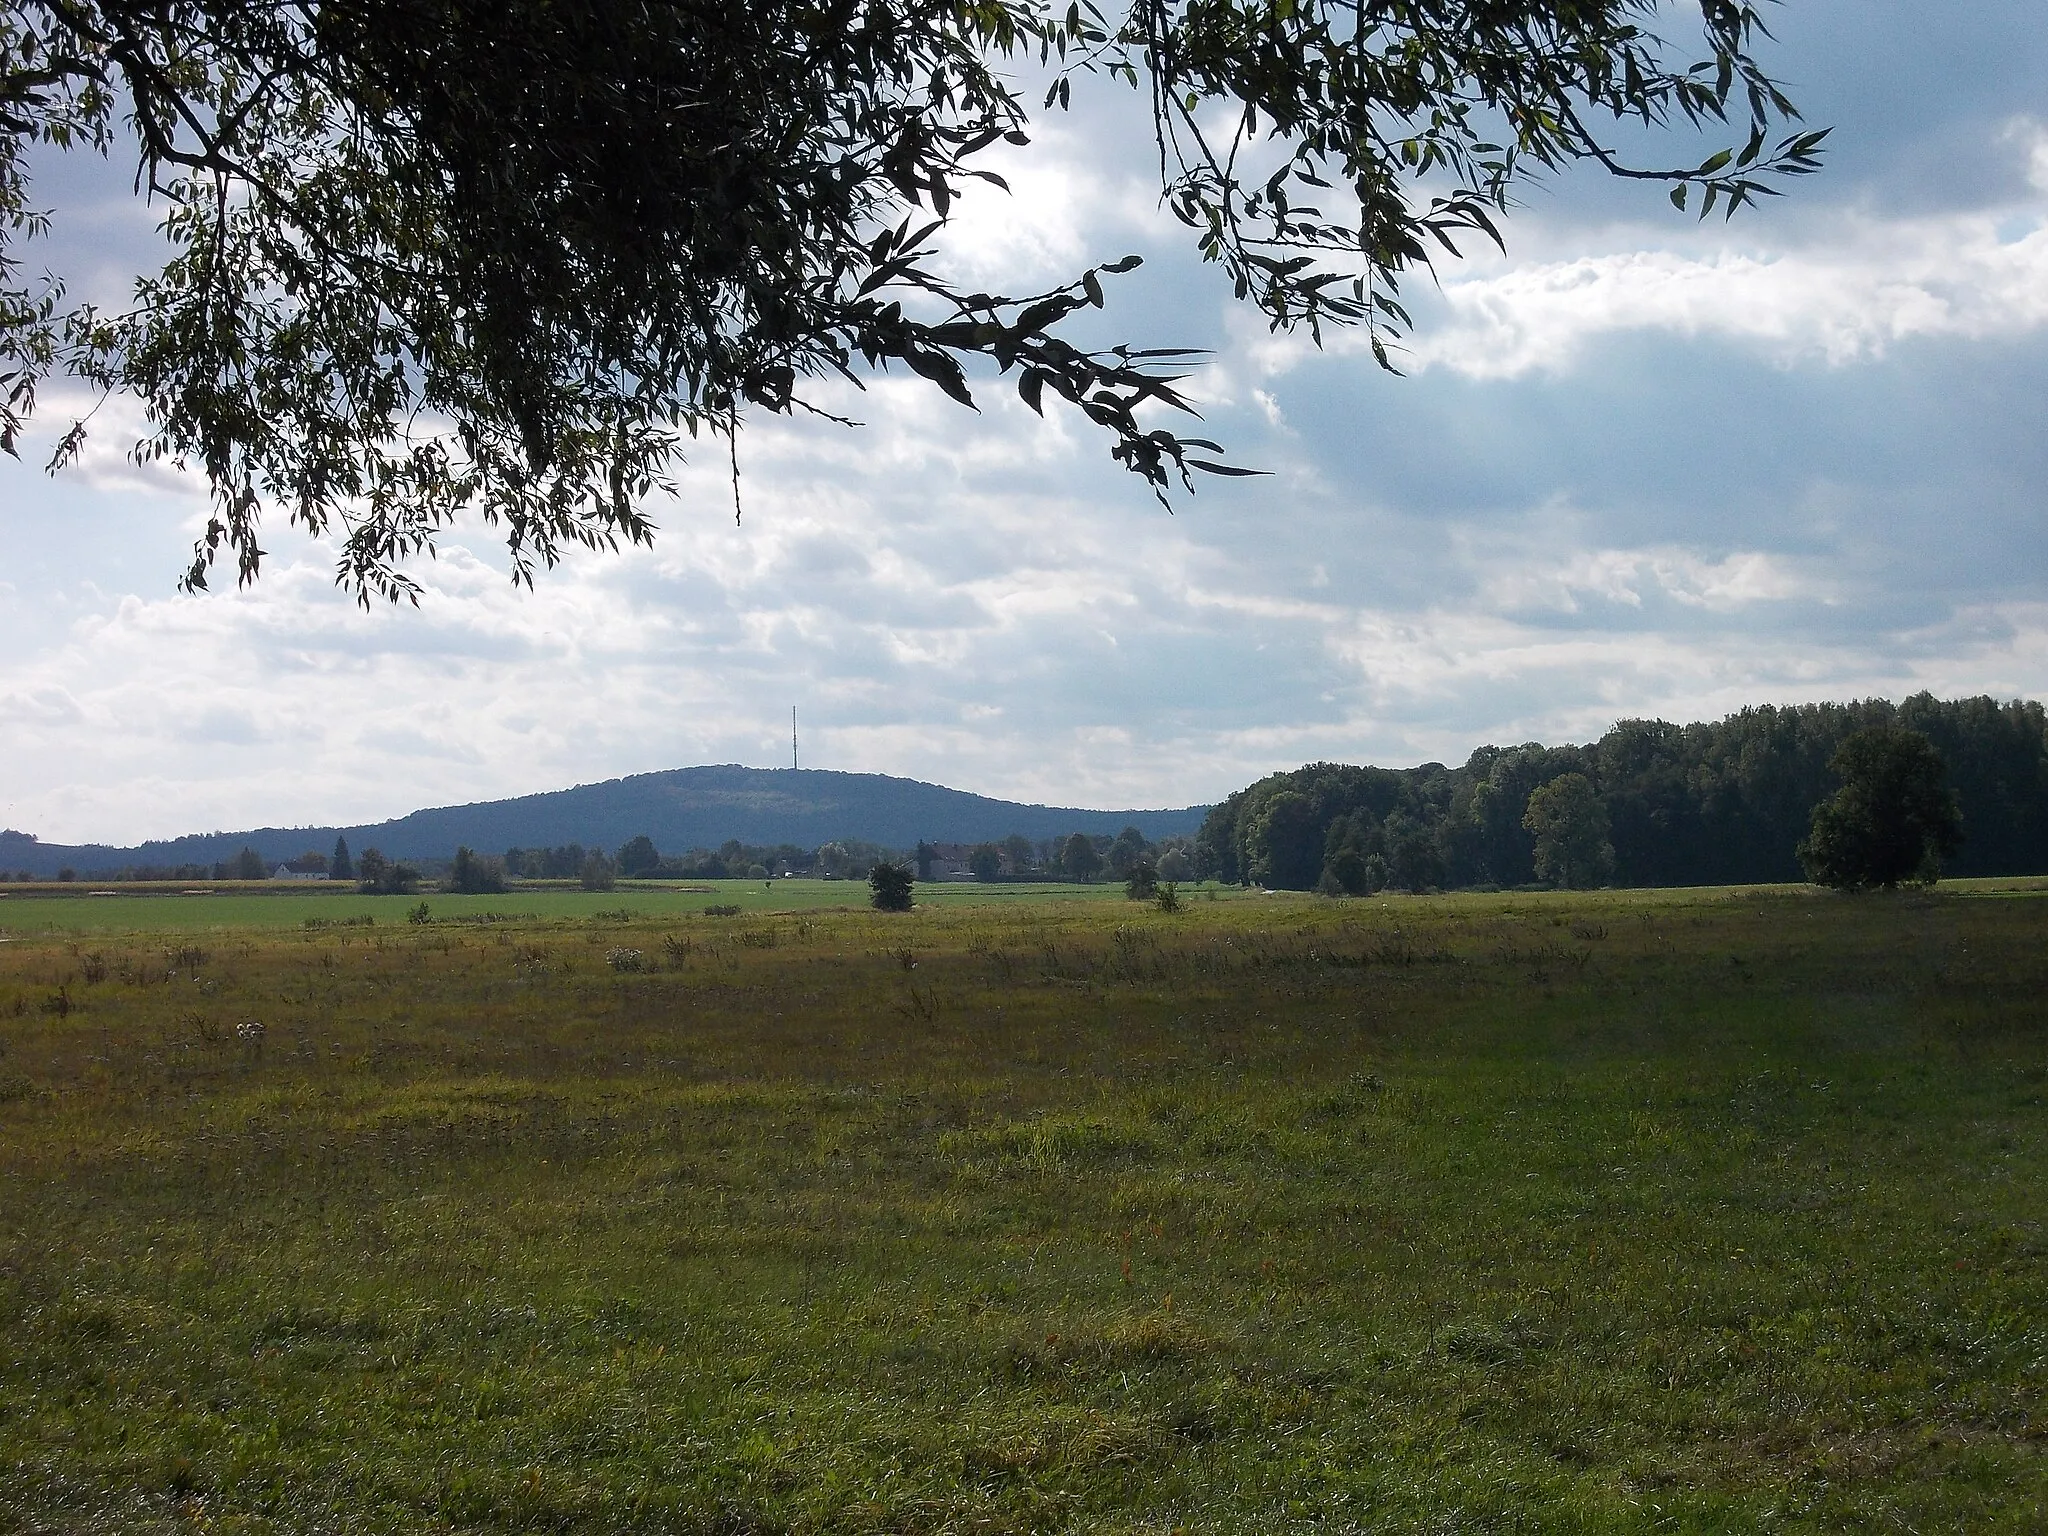 Photo showing: Collm hill form the north-east (view from the Langes Holz nature reserve near Kleinböhla, Dahlen, Nordsachsen district, Saxony)